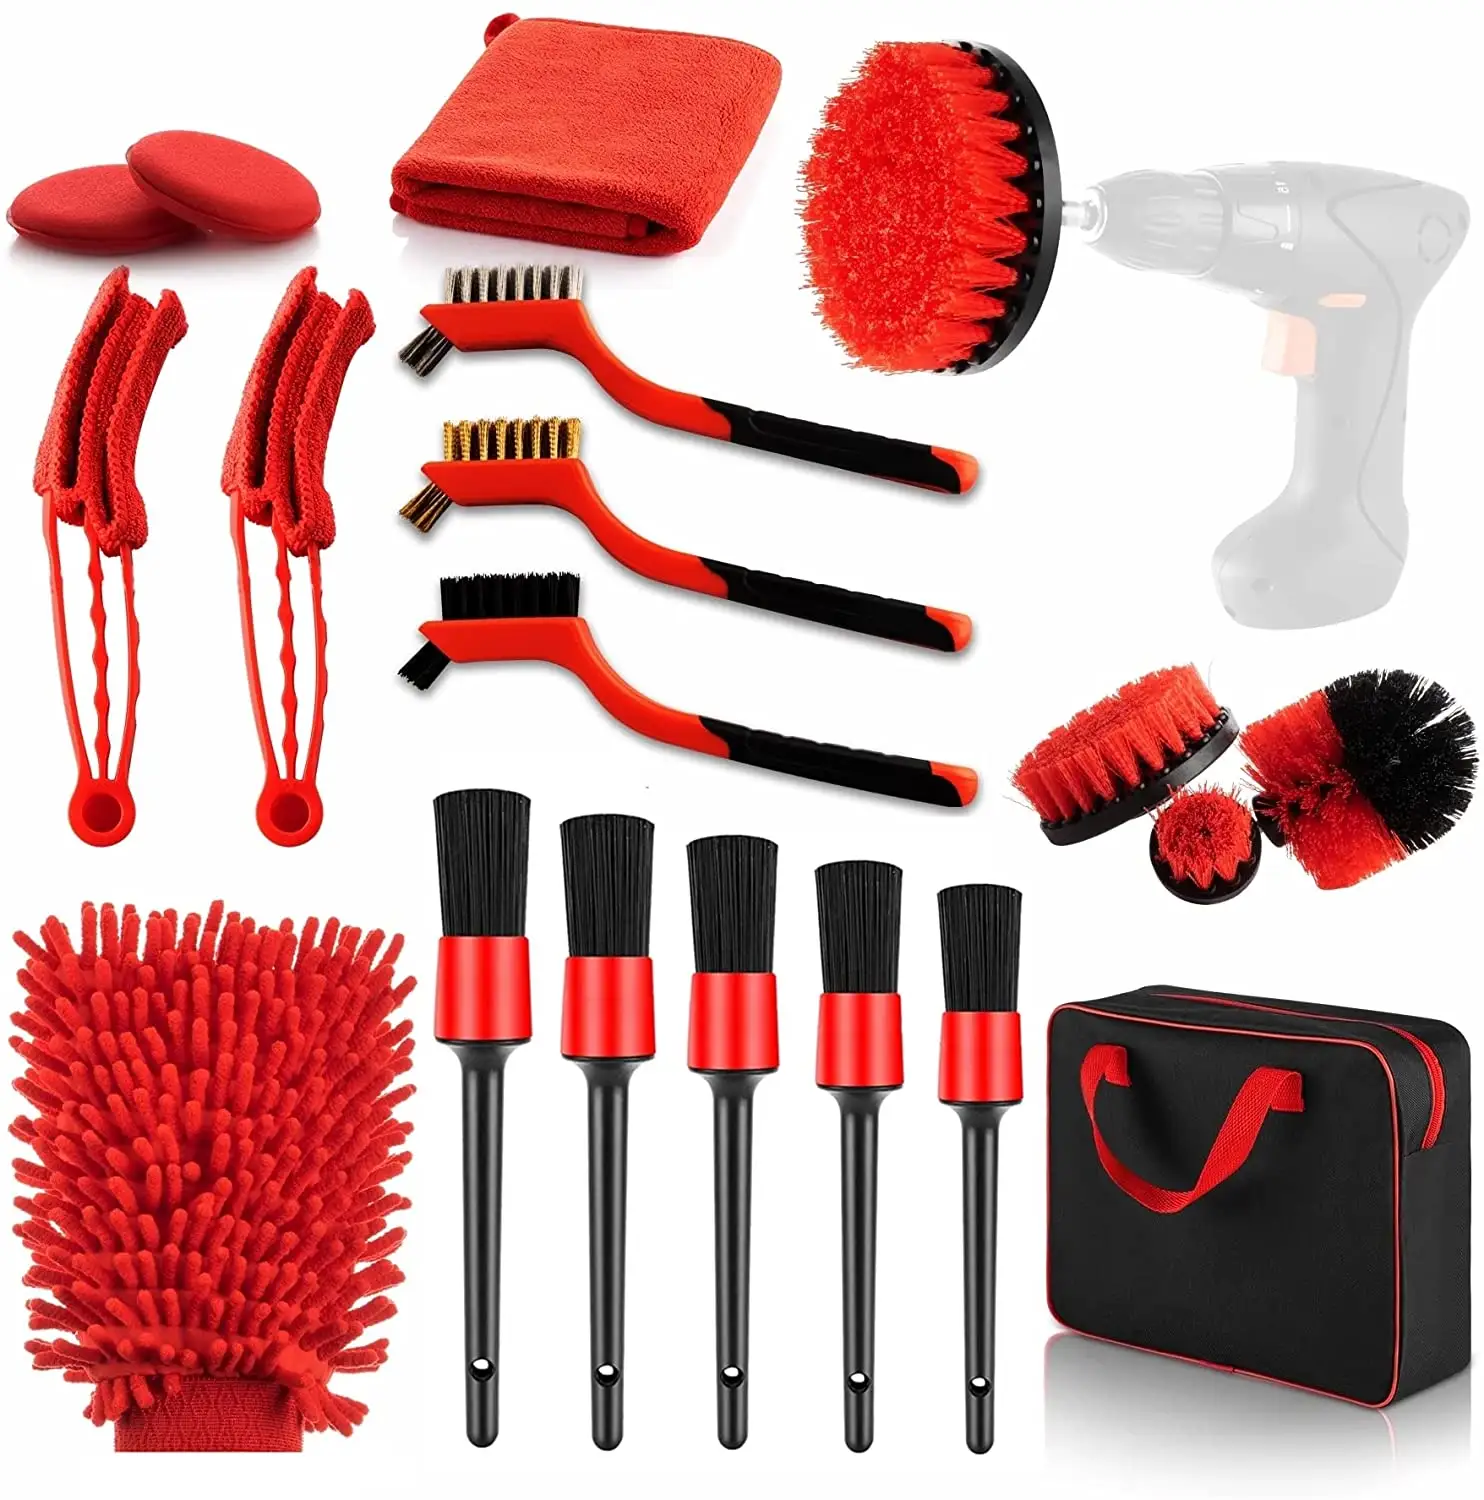 Factory direct supply Hot Sales 19Pcs red Car Detailing Brush Set Auto Washing Drill Brush Car Cleaning Tools Kit for car care